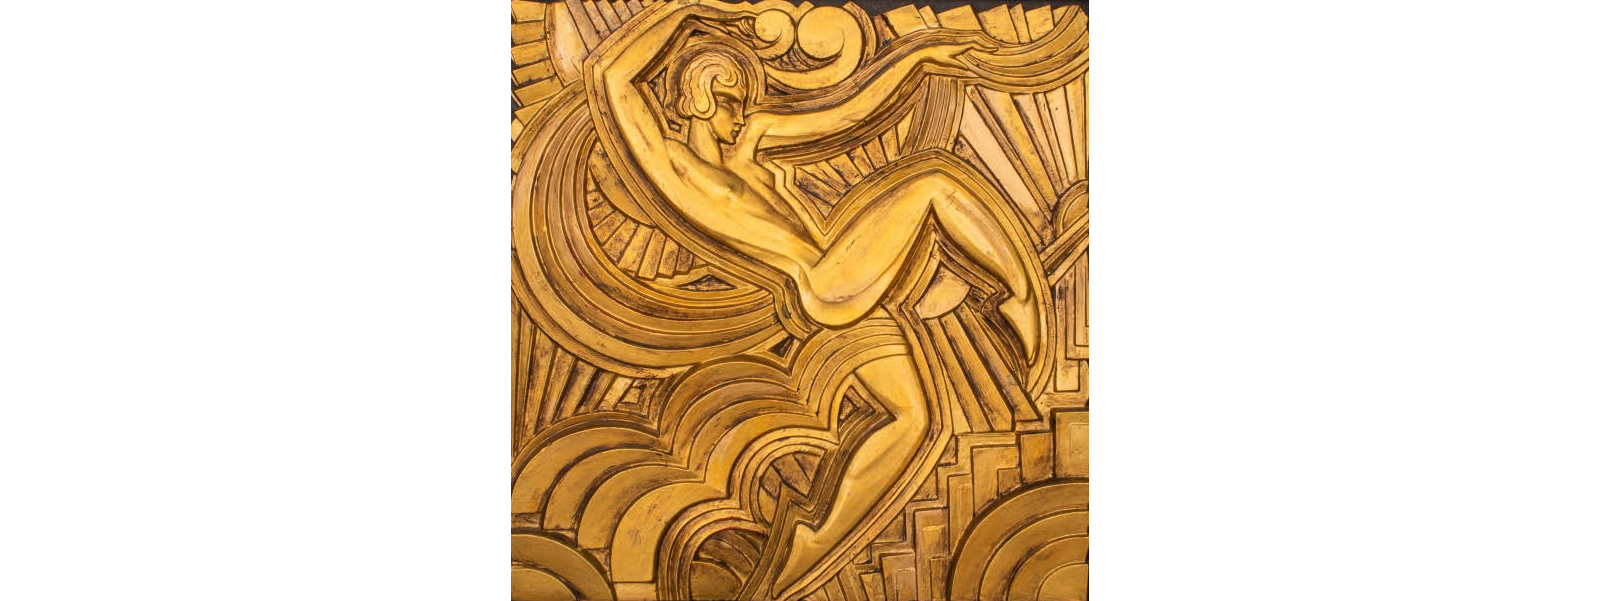 Art Deco gilt and gessoed wood plaque by Maurice Picaud for the Folies Bergere cabaret in Paris, depicting dancer Nino Nikolska, estimated at $1,500-$2,500